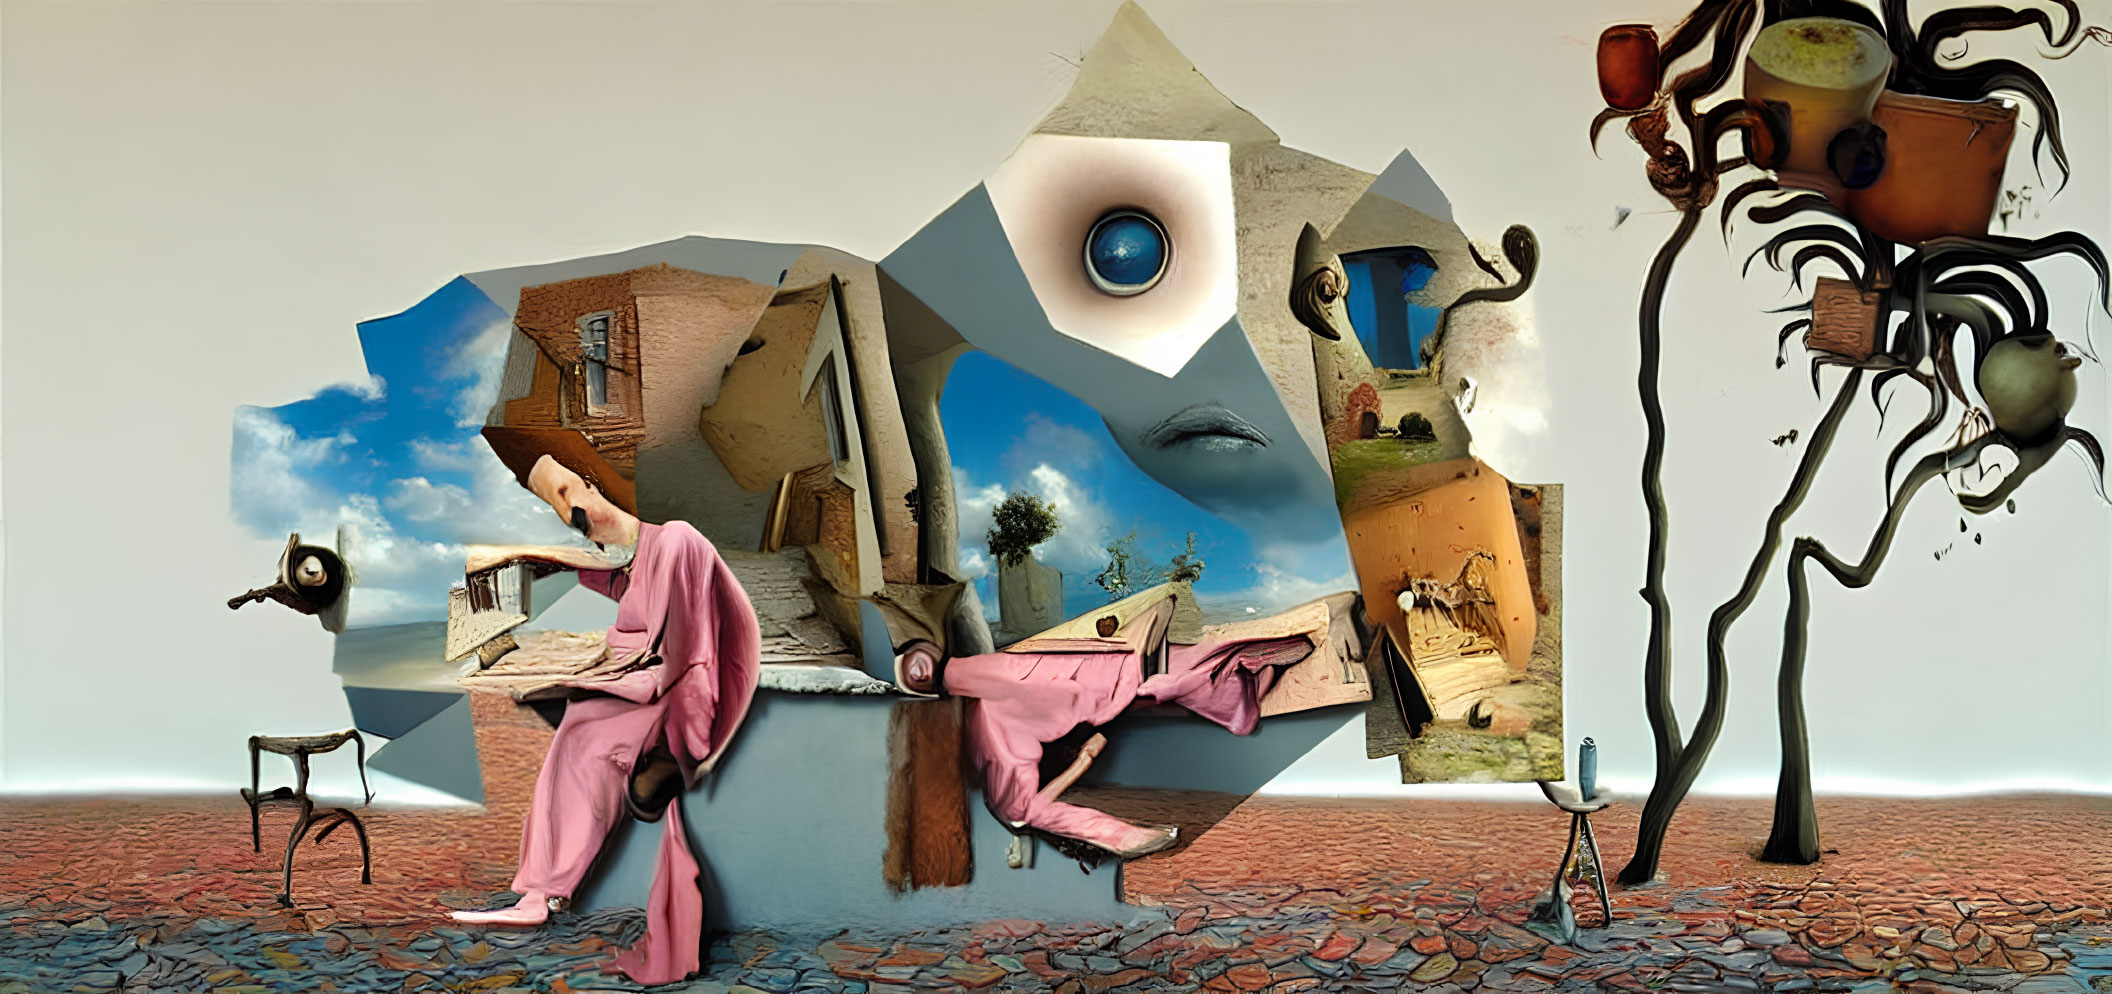 Surreal composite image of fragmented figure reading in pink